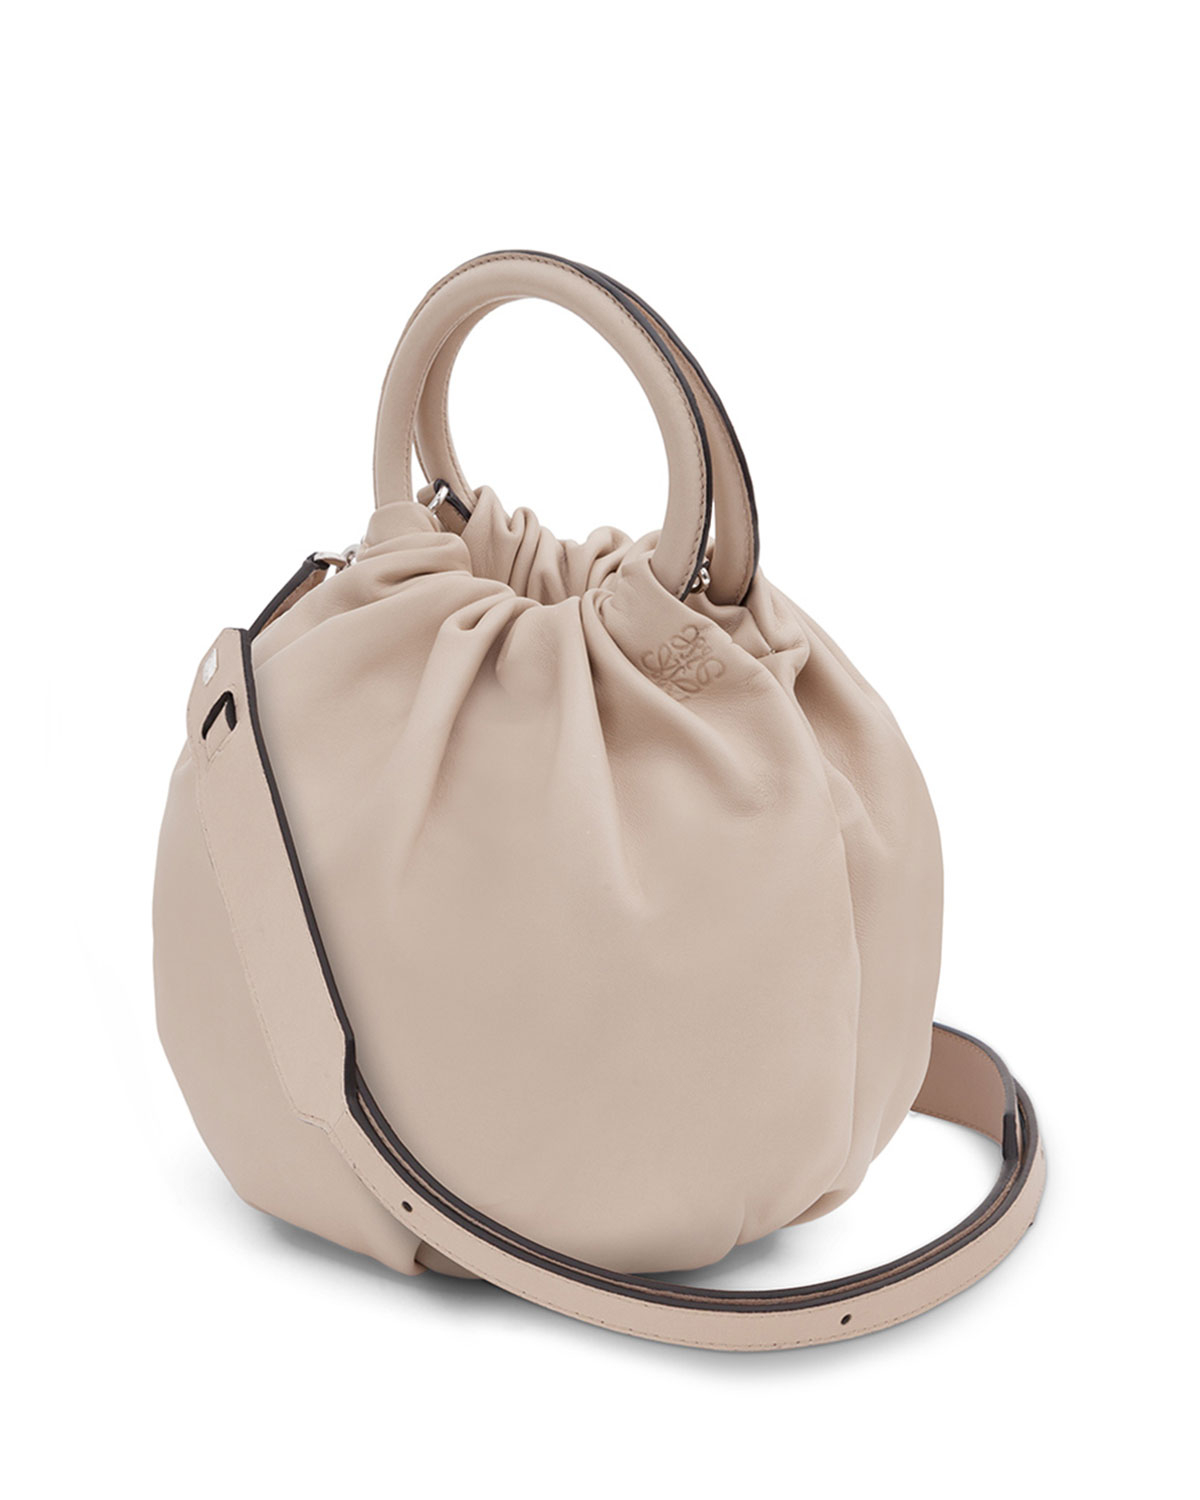 Download Lyst - Loewe Bounce Gathered Lambskin Bag in Natural